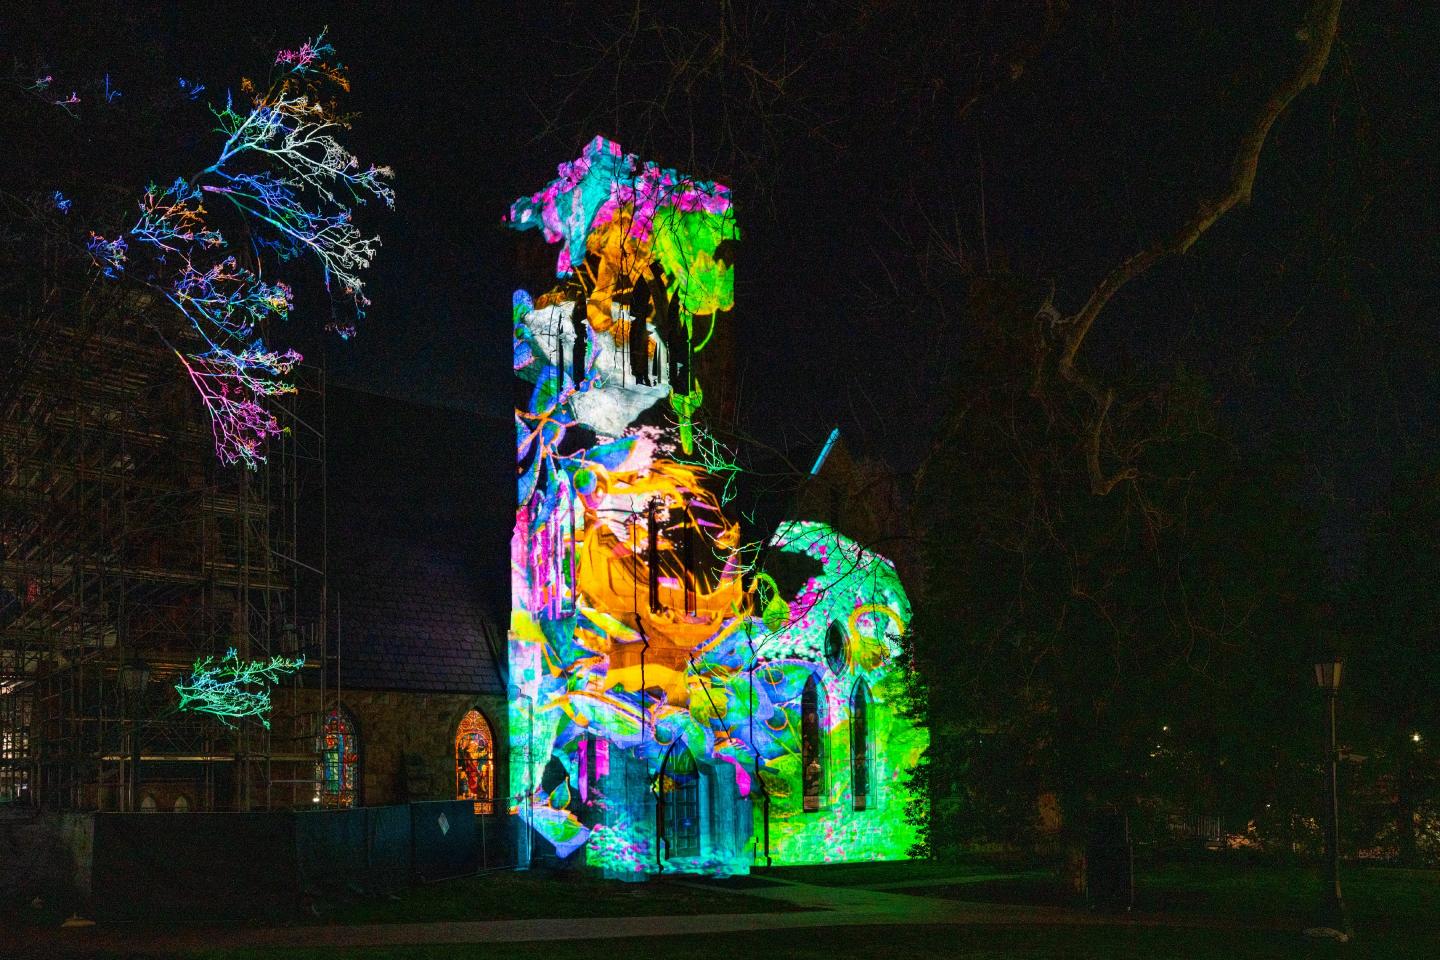 Colorful Projection Mapping on the UVA Chapel